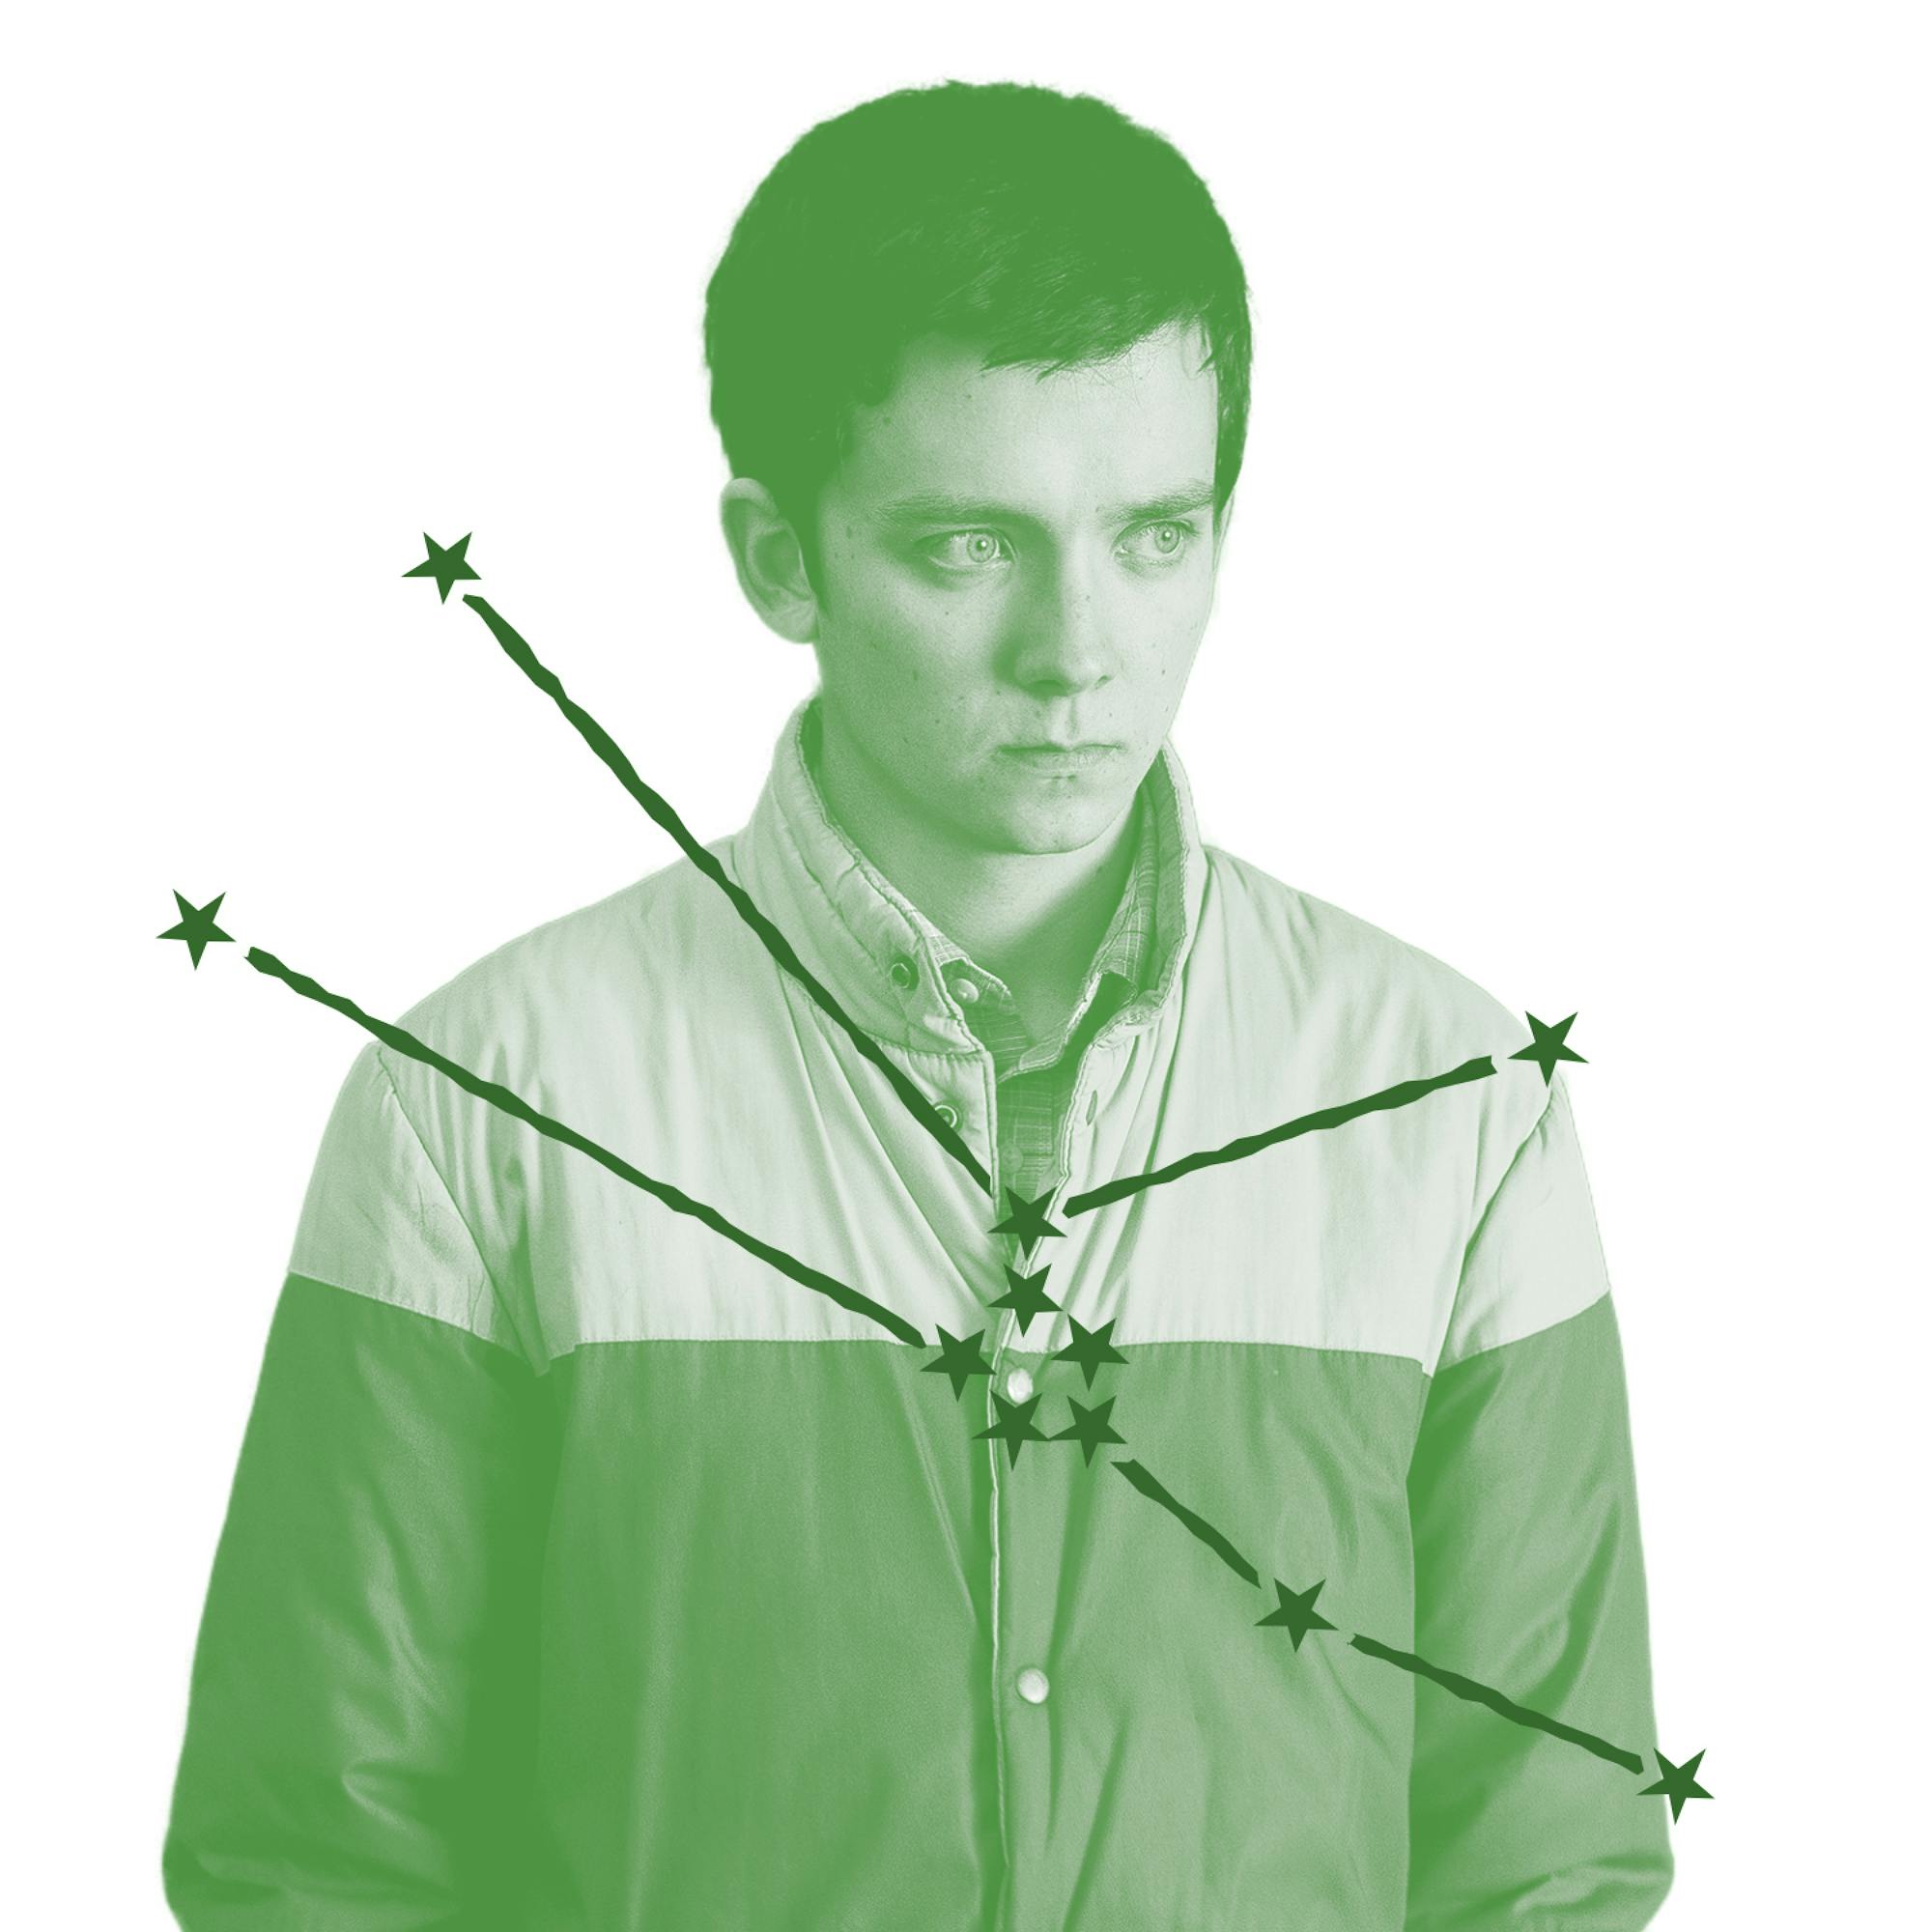 Otis Milburn (played by Asa Butterfield) looks intense in his color-blocked windbreaker in this still from Sex Education. He wears an expression that would make Freud proud. Over the image is an illustration of Otis’s zodiac constellation.